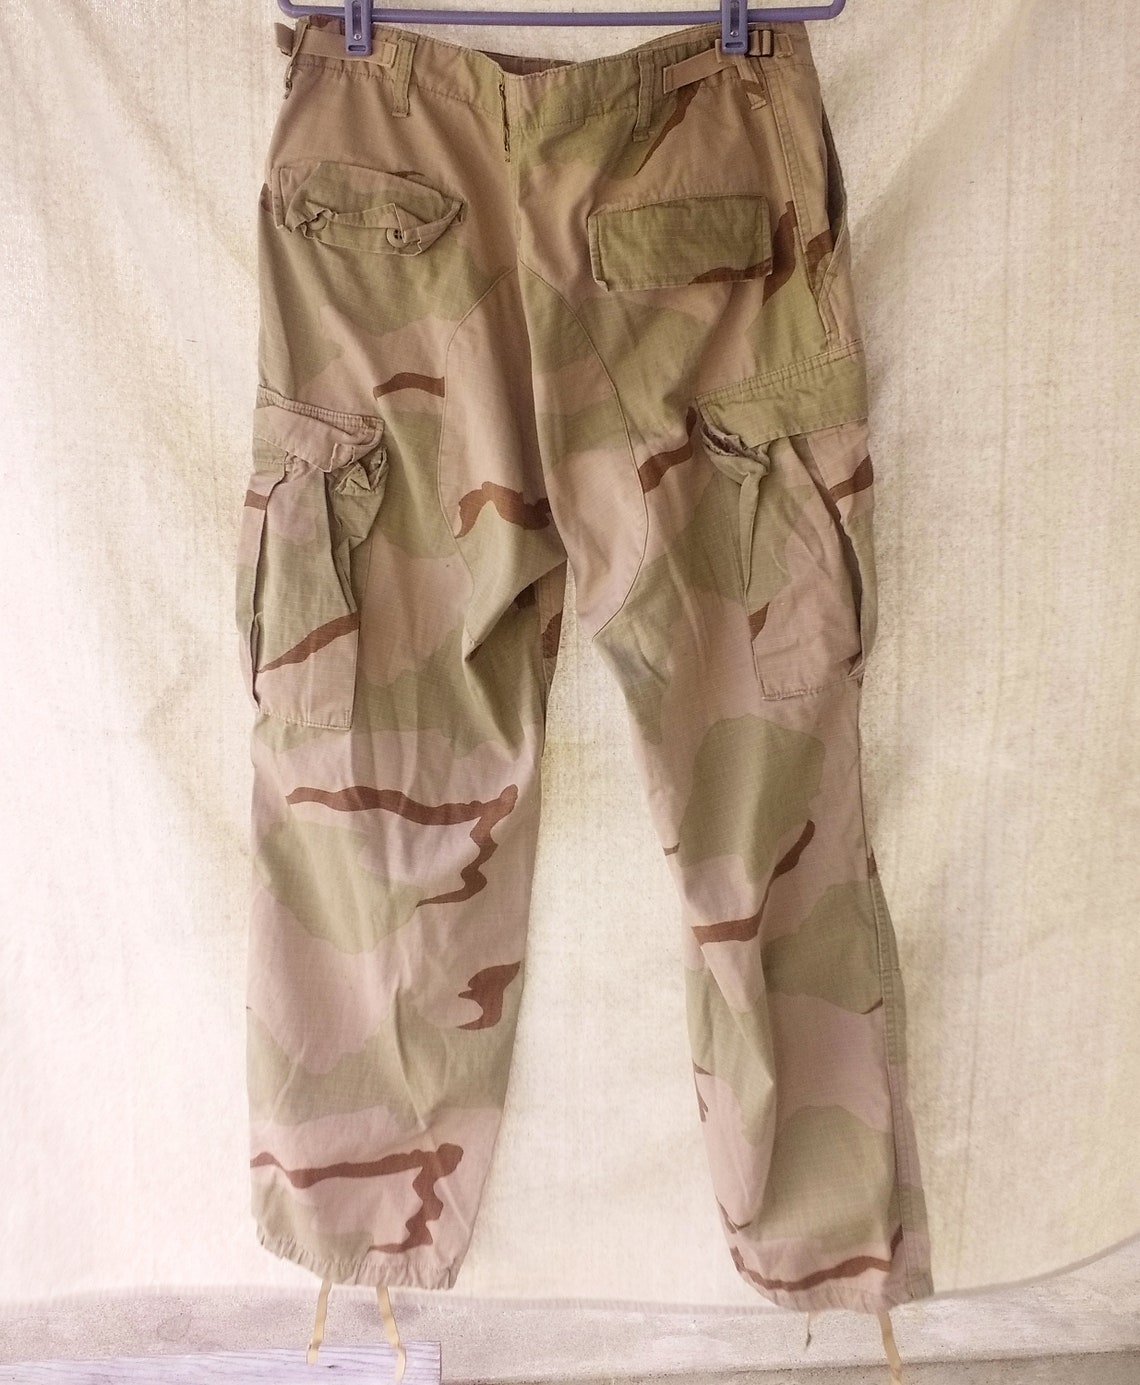 Vintage Army Surplus Desert Camo Pants BDU Cargo US Army Issue | Etsy